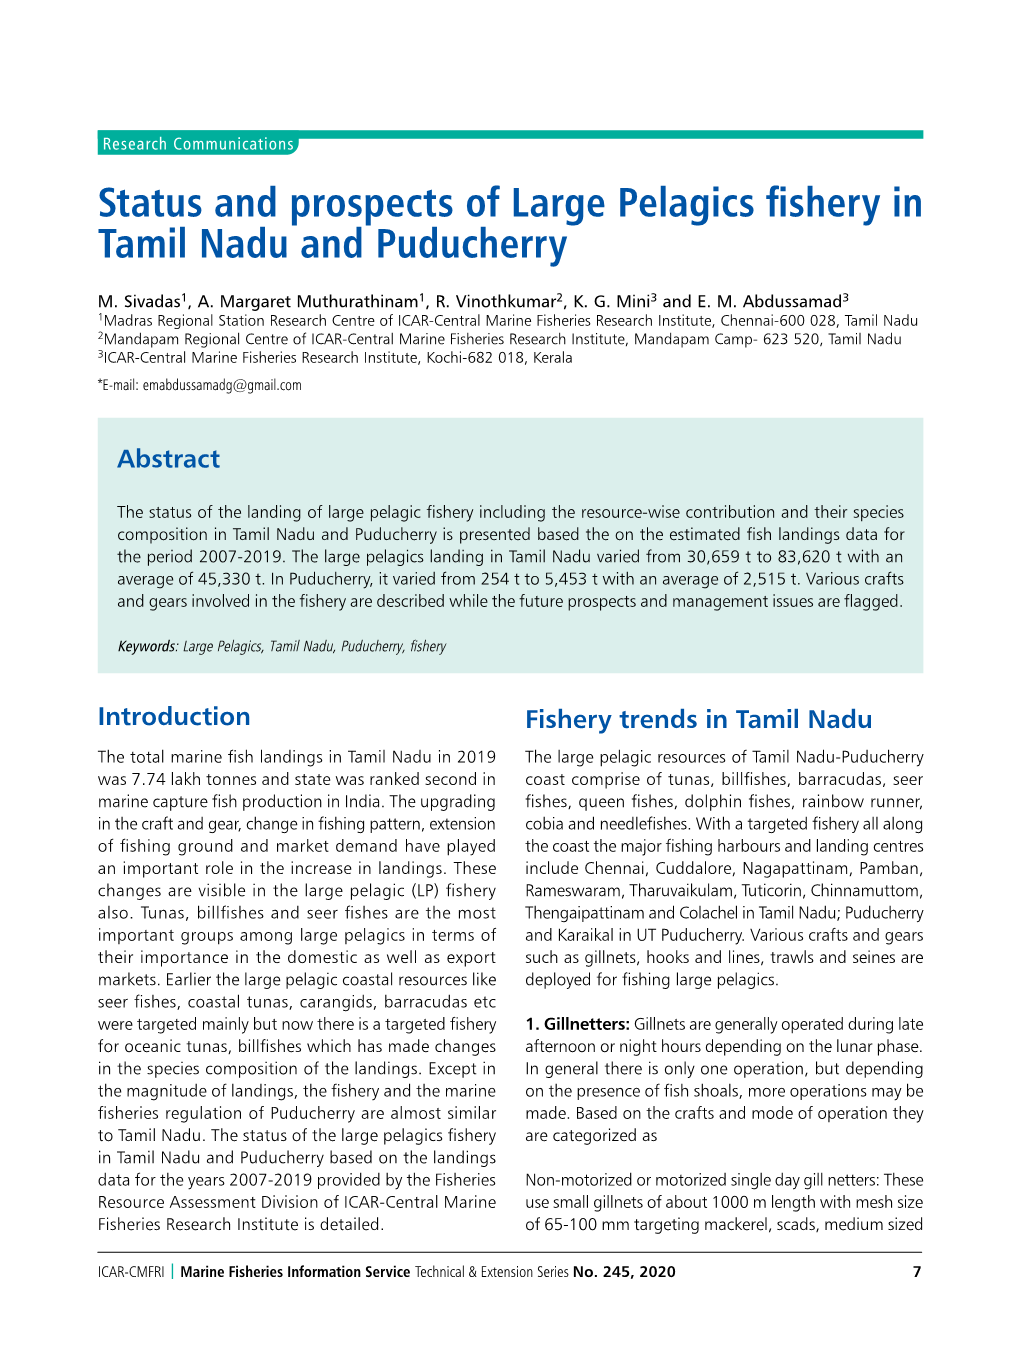 Status and Prospects of Large Pelagics Fishery in Tamil Nadu and Puducherry